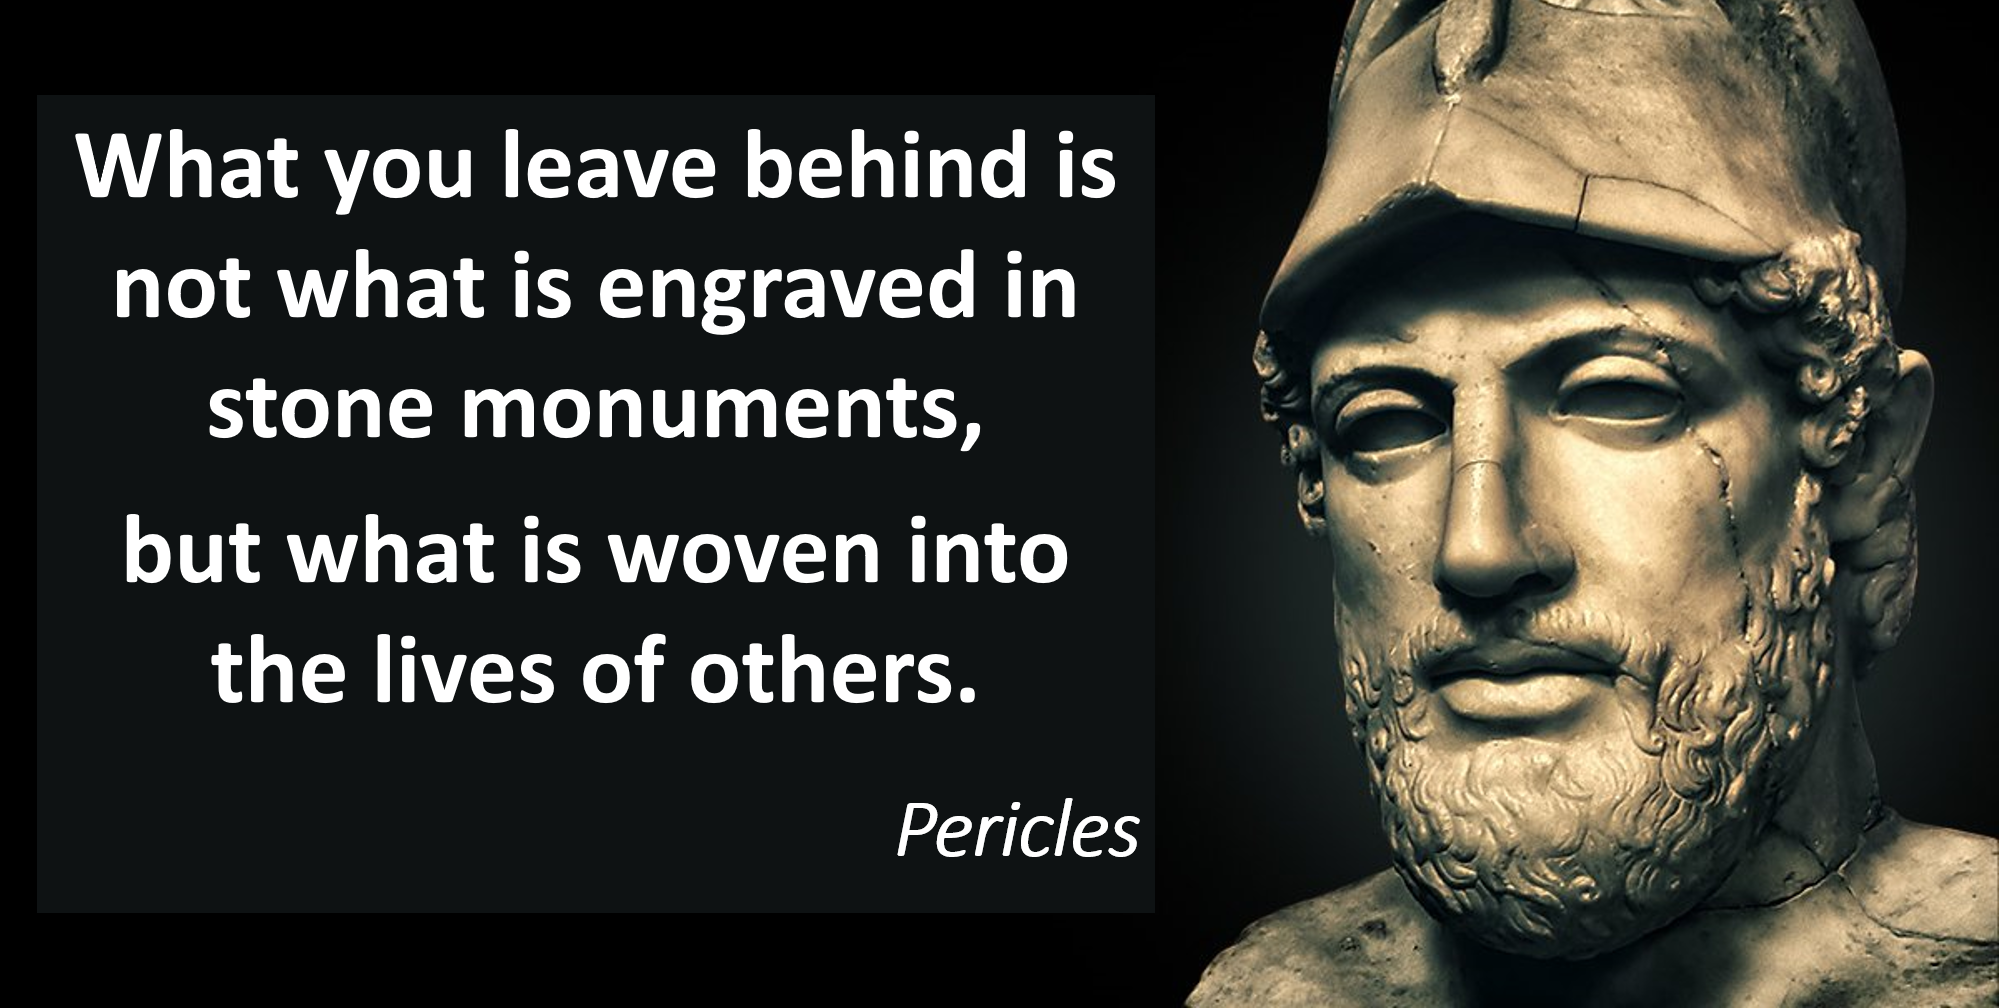 SIU Ancient Practices Pericles quote. What you leave behind is not what is engraved in stone monuments,  but what is woven into the lives of others.